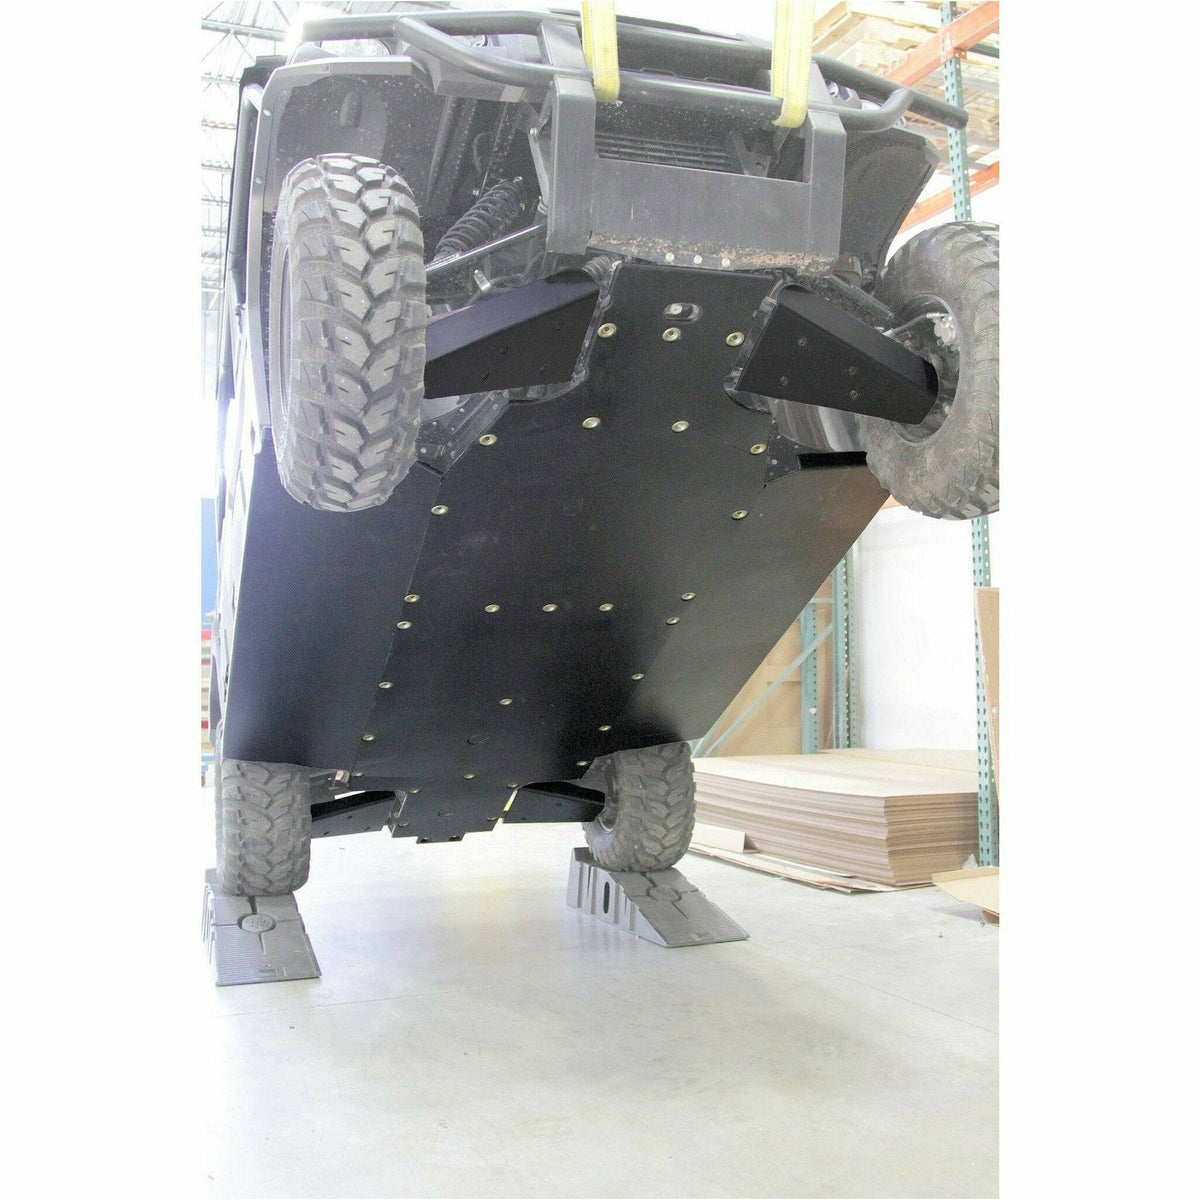 SSS Off-Road UHMW Skid Plate for Kawasaki Mule Pro